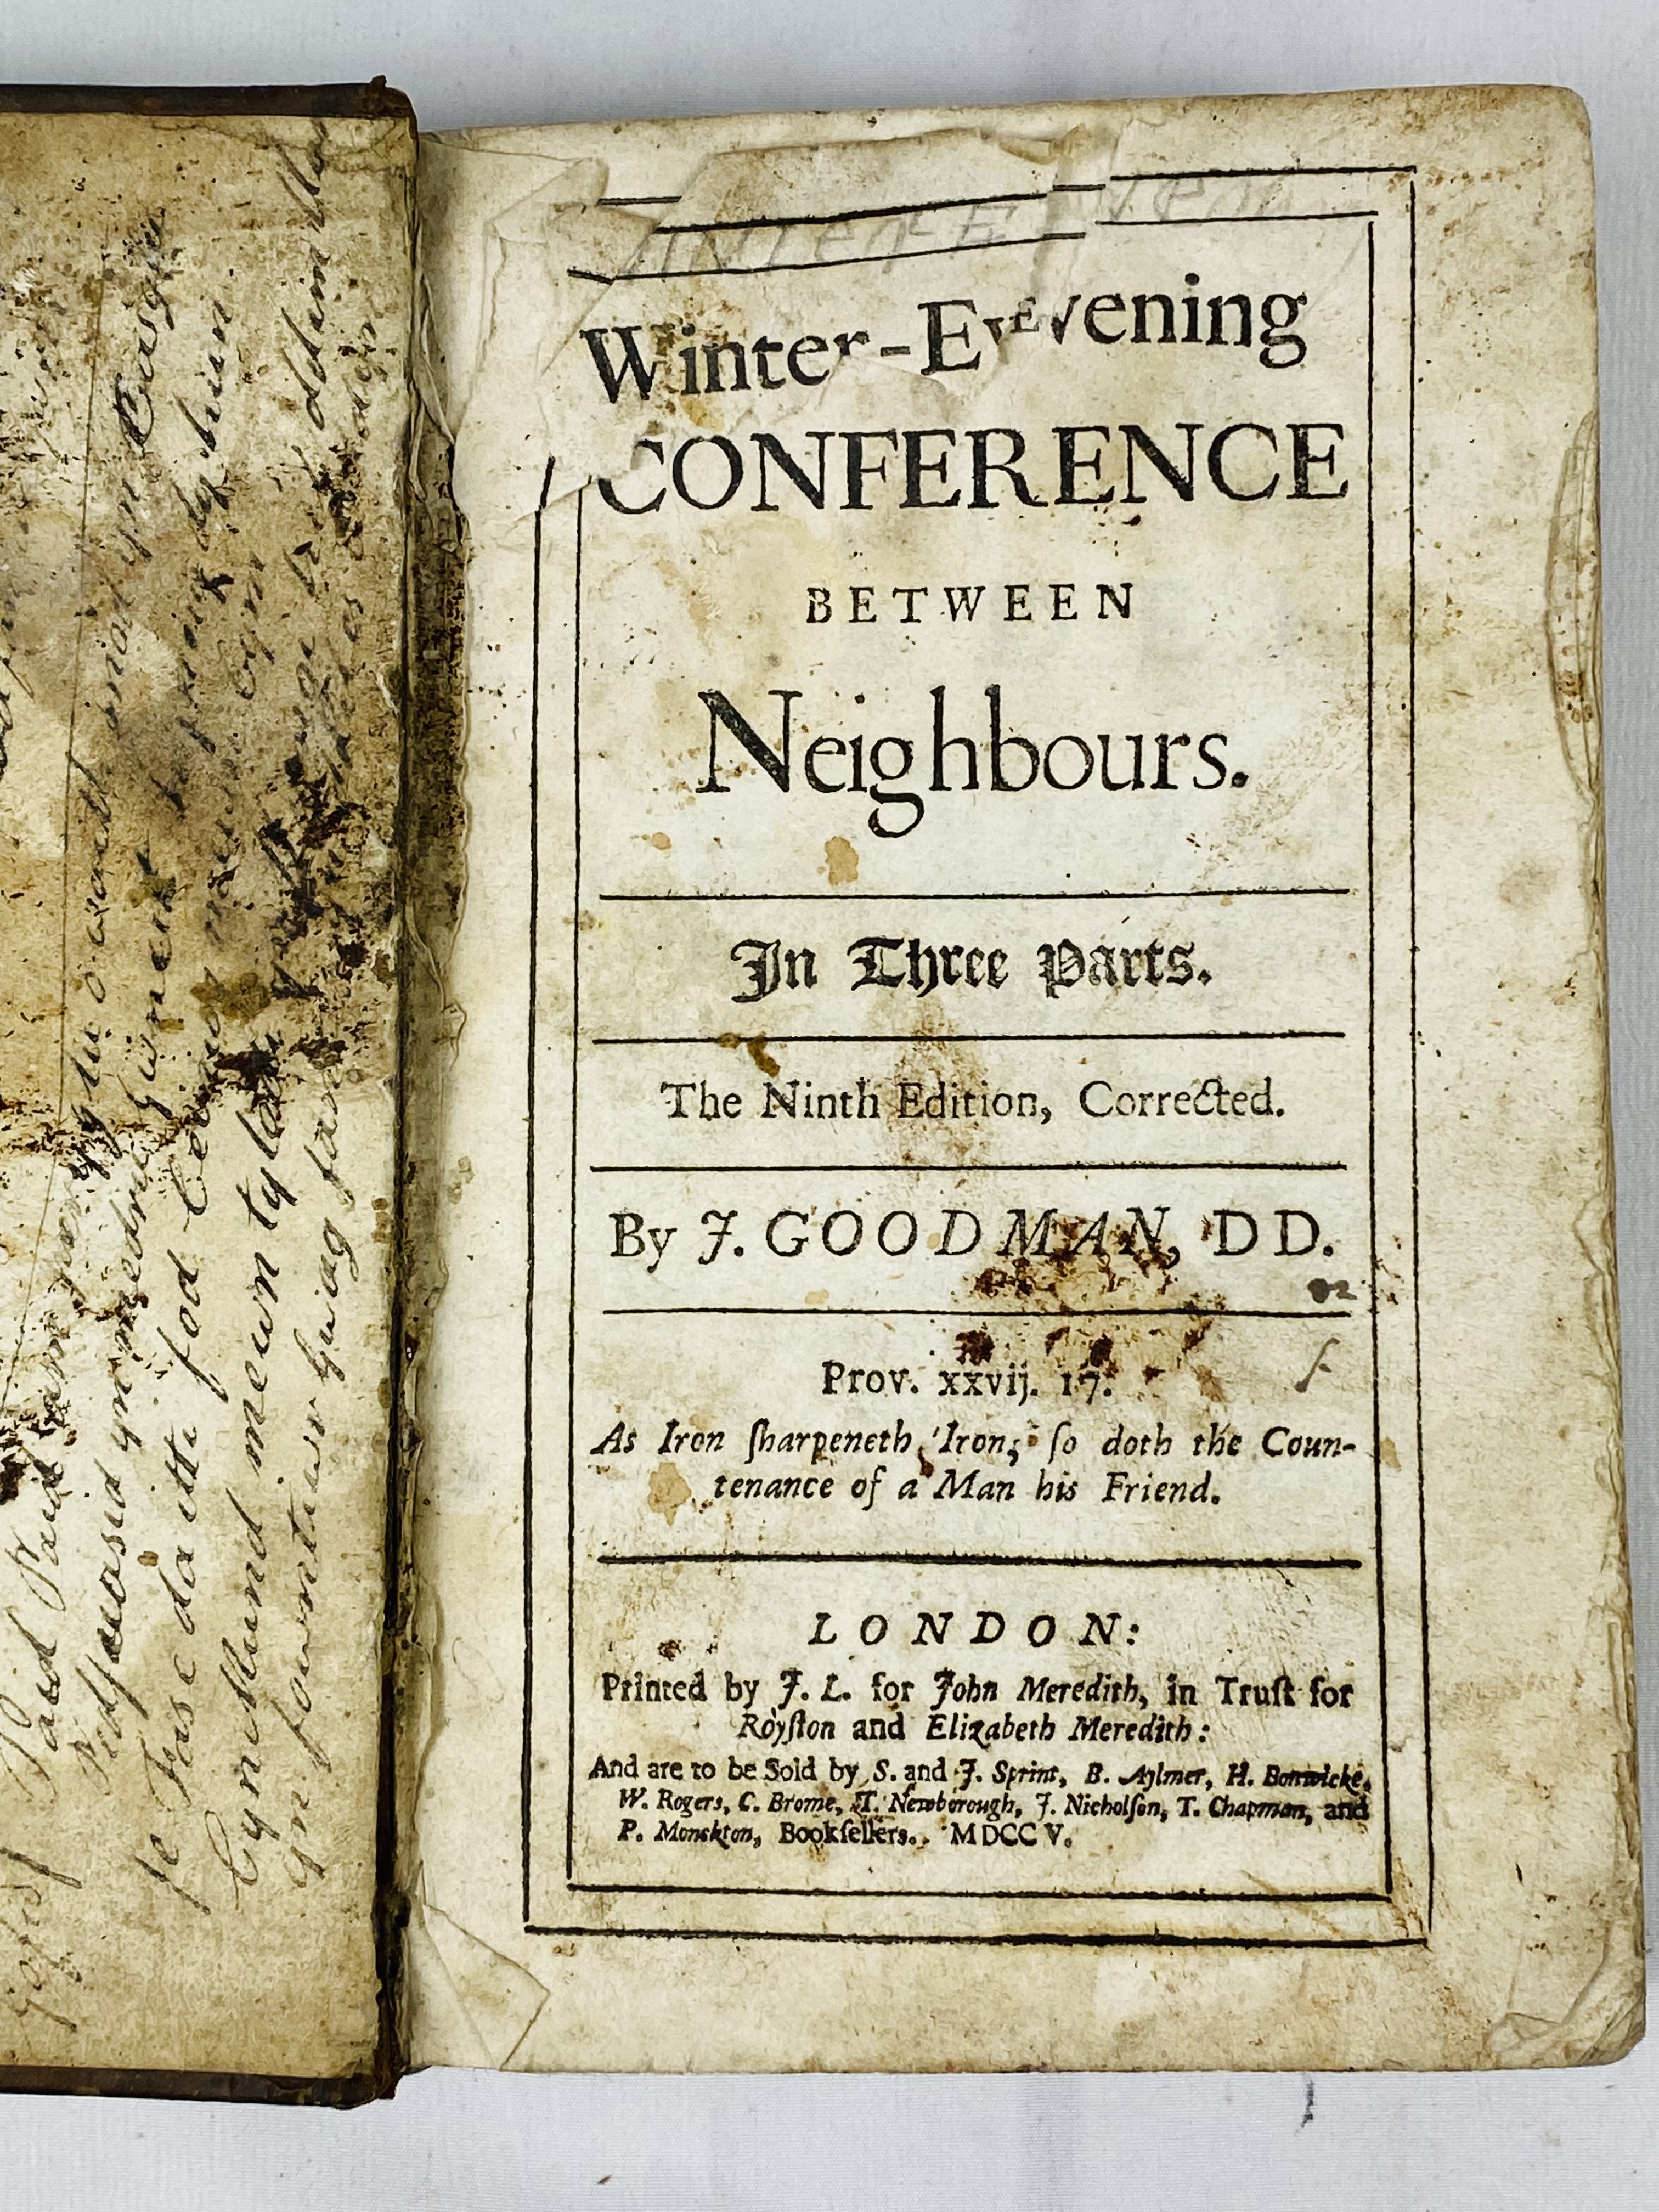 Winter Evening Conference Between Neighbours, by J. Goodman, ninth edition, leather bound, 1705. - Image 3 of 6